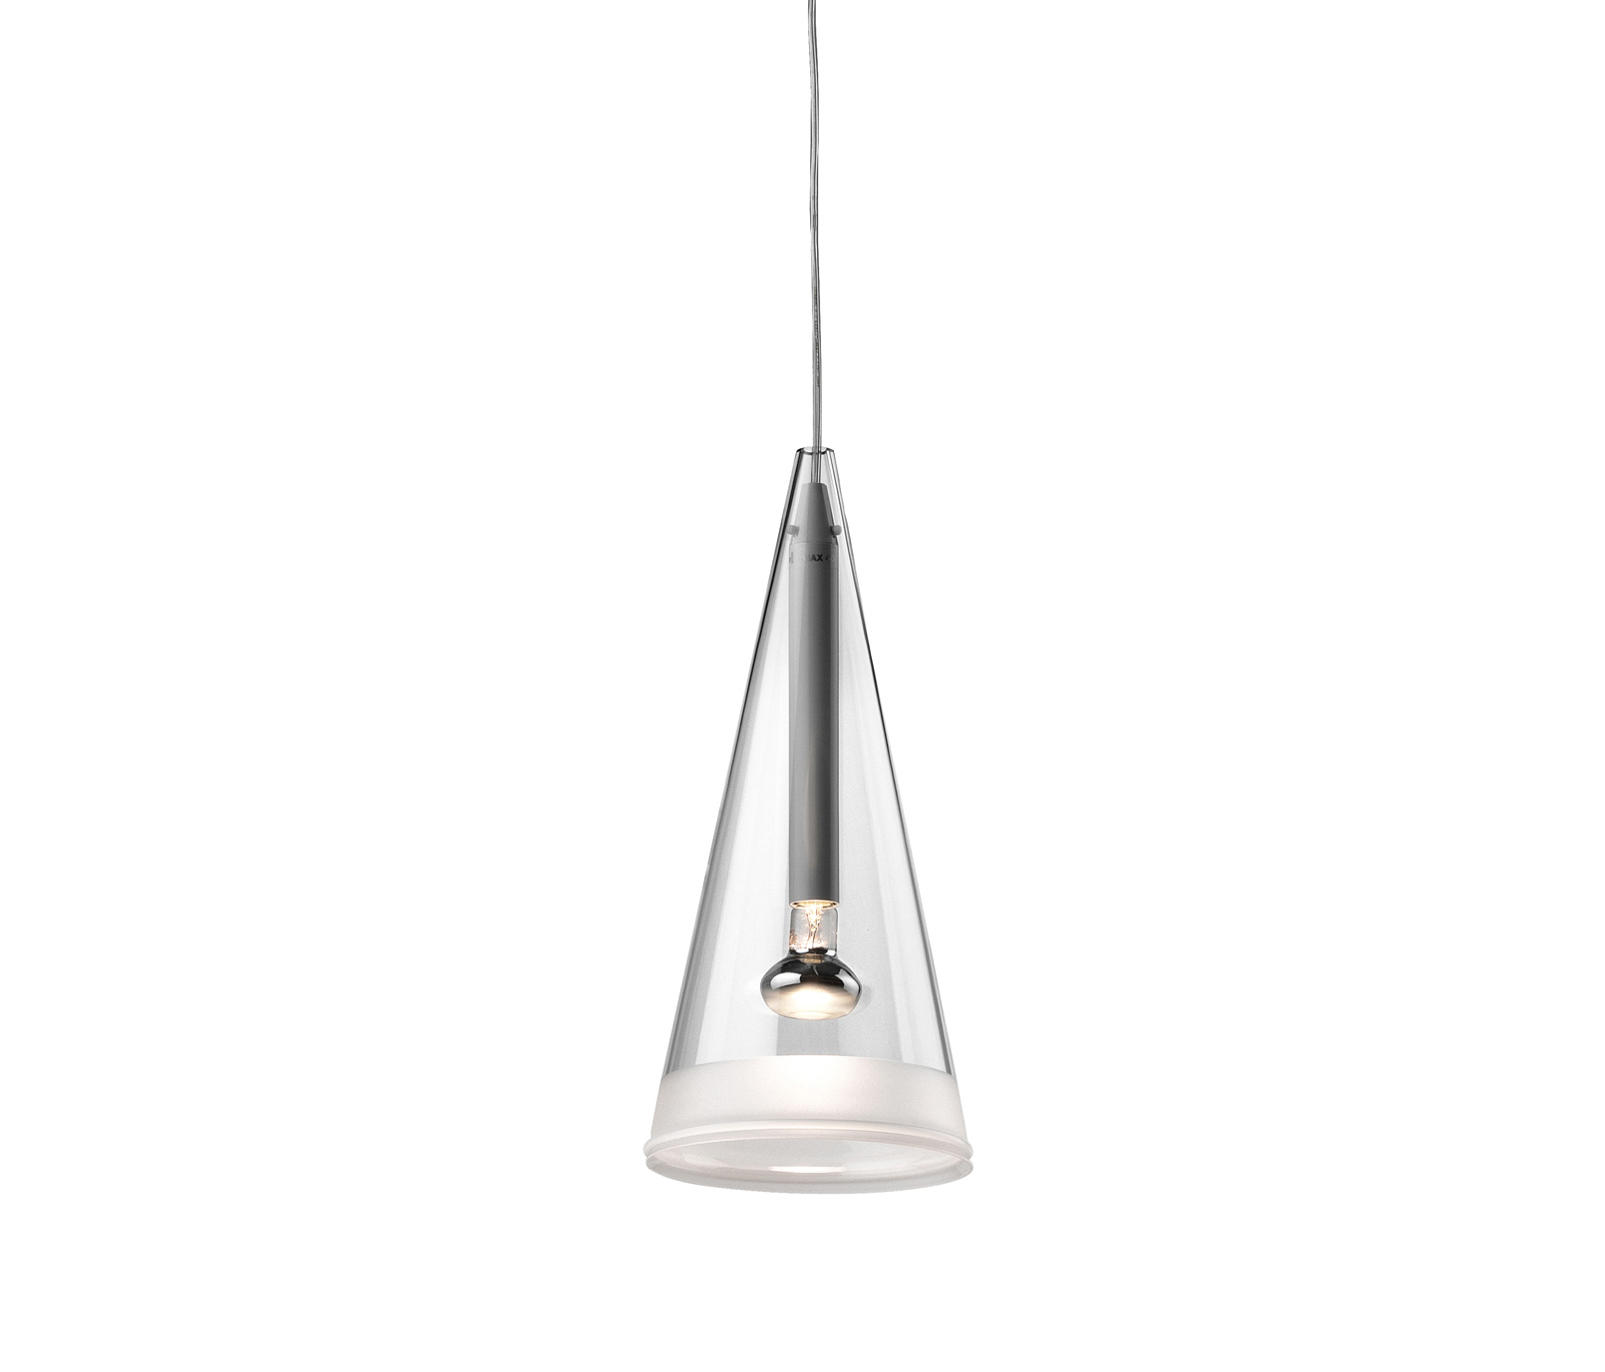 FUCSIA 1 - General lighting from Flos | Architonic